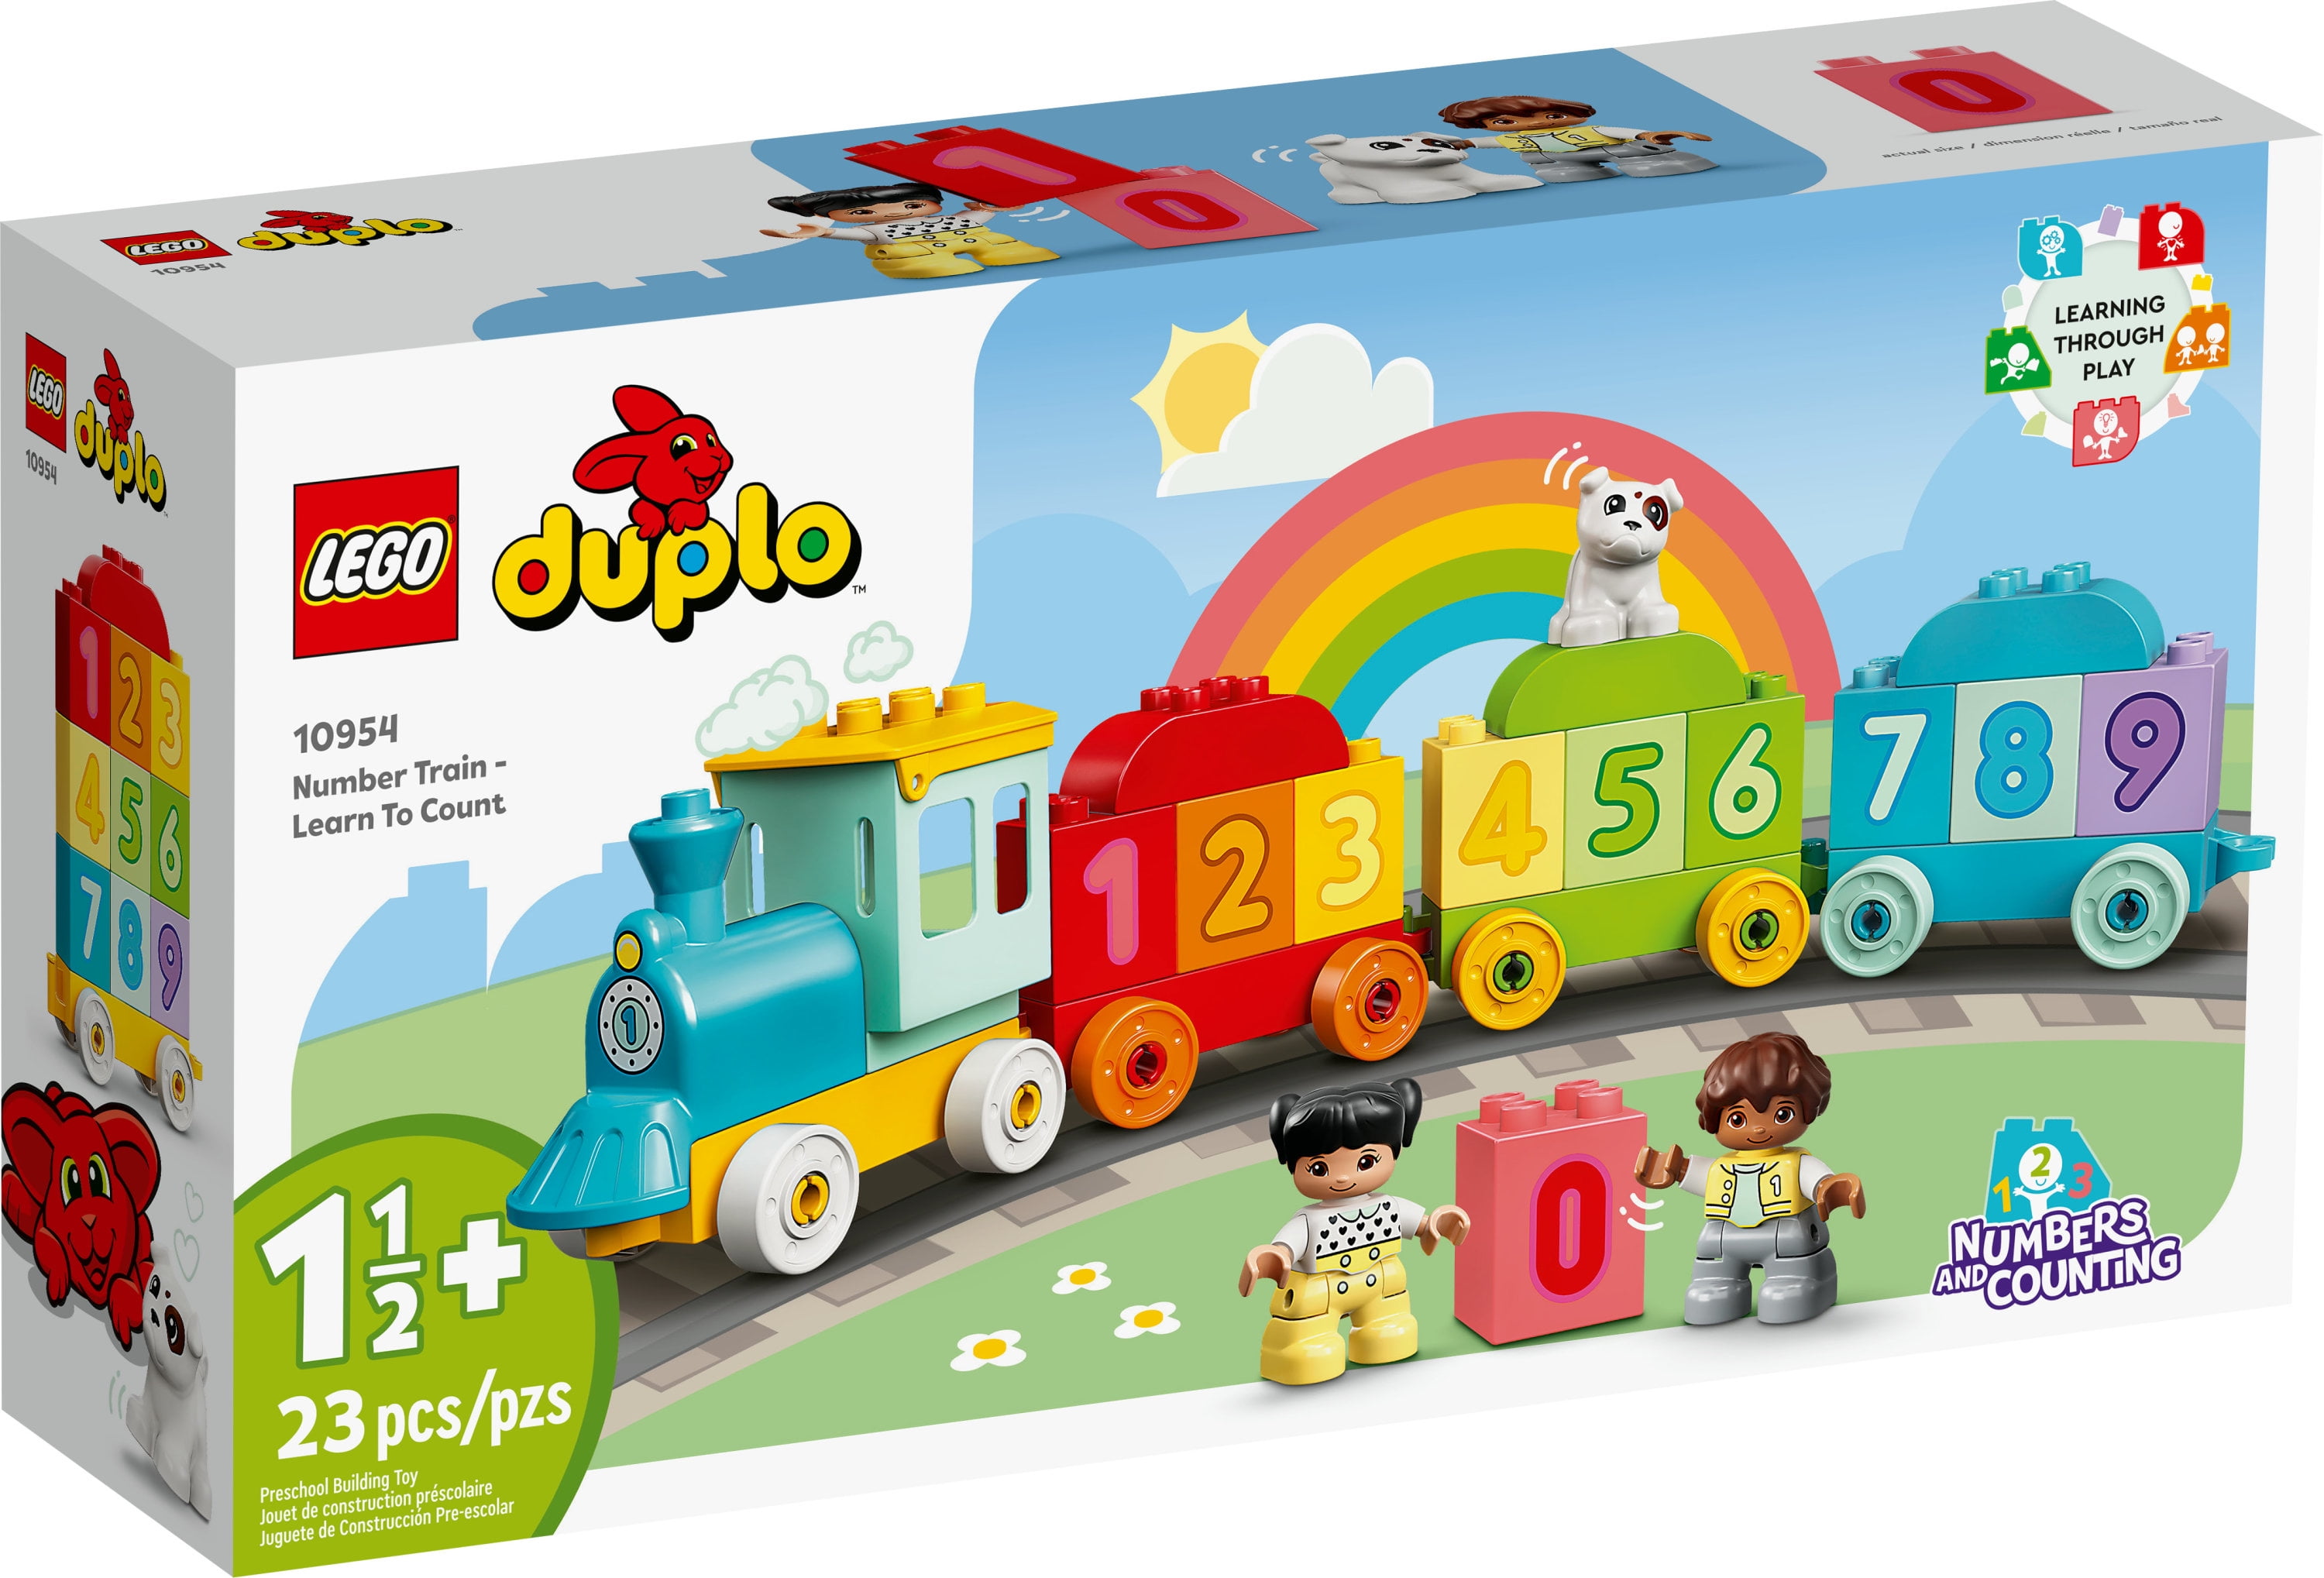 Bore volatilitet sejle LEGO DUPLO My First Number Train 10954 Fine Motor Skills Toy with Bricks  for Learning Numbers, Preschool Educational Toys for 1.5 - 3 Year Old  Toddlers, Girls & Boys, Early Development Activity Set - Walmart.com